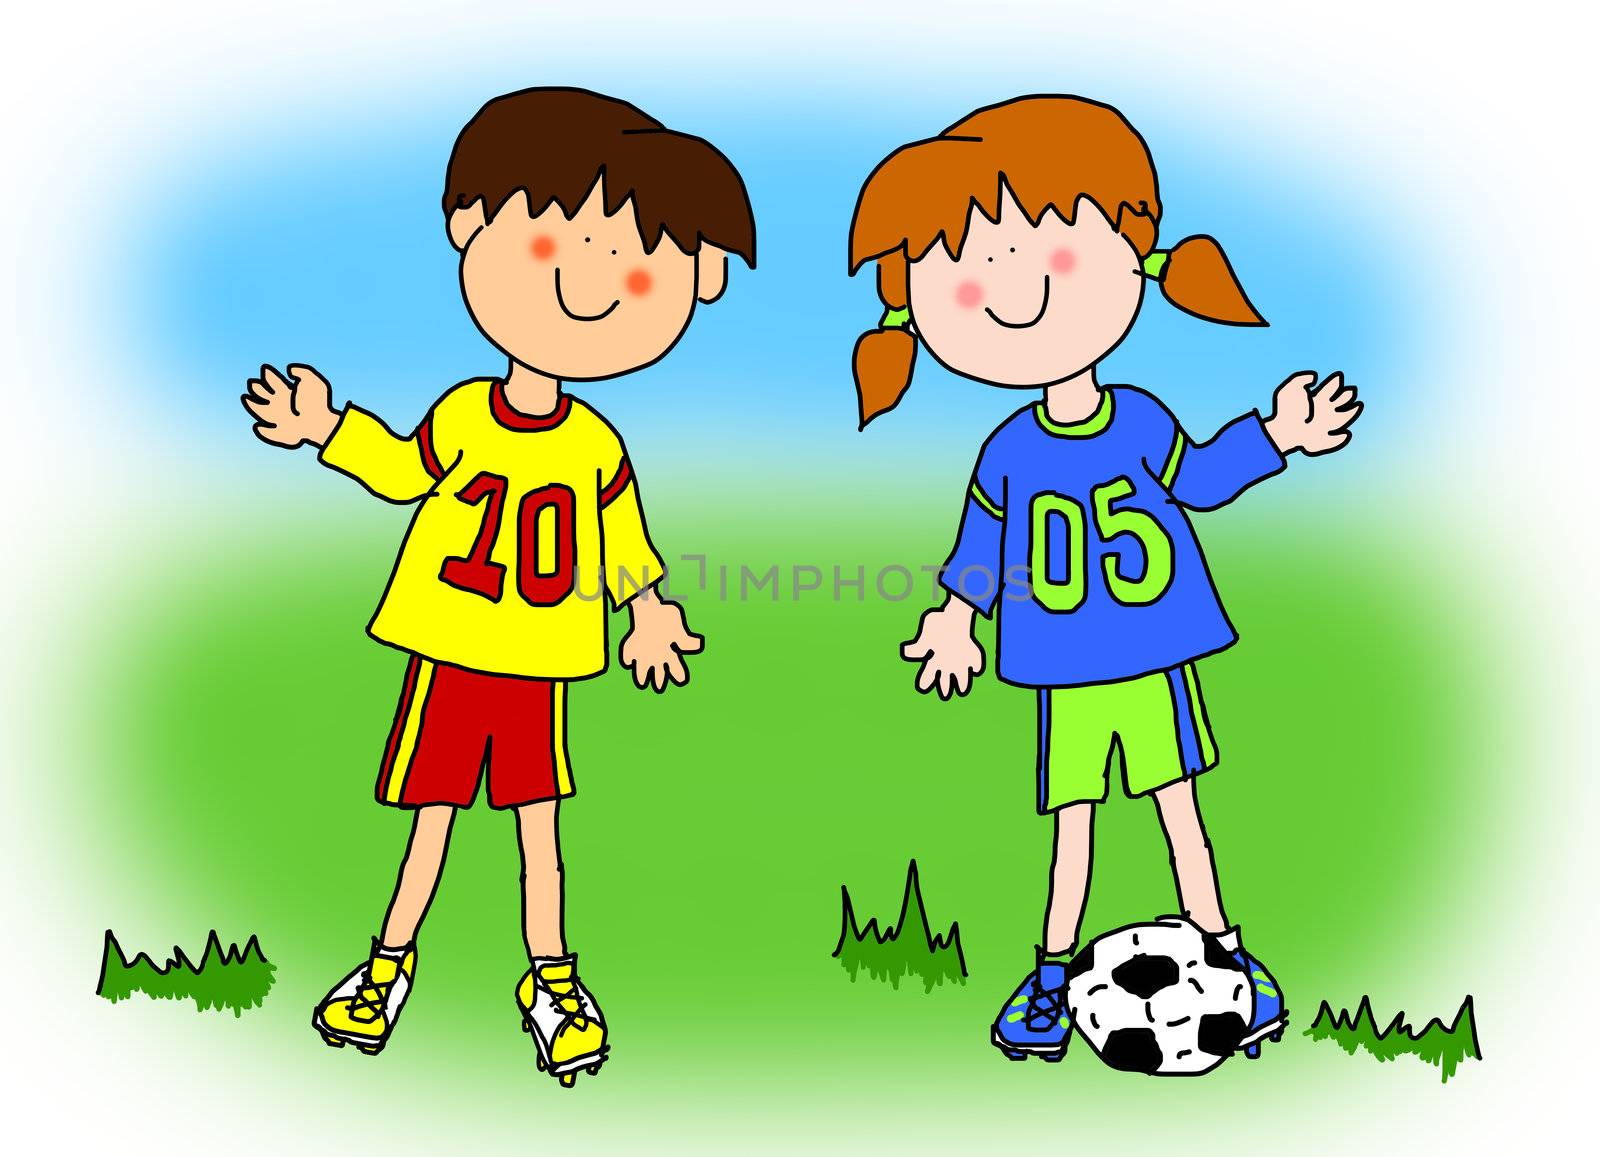 Boy and girl cartoon soccer player by Mirage3